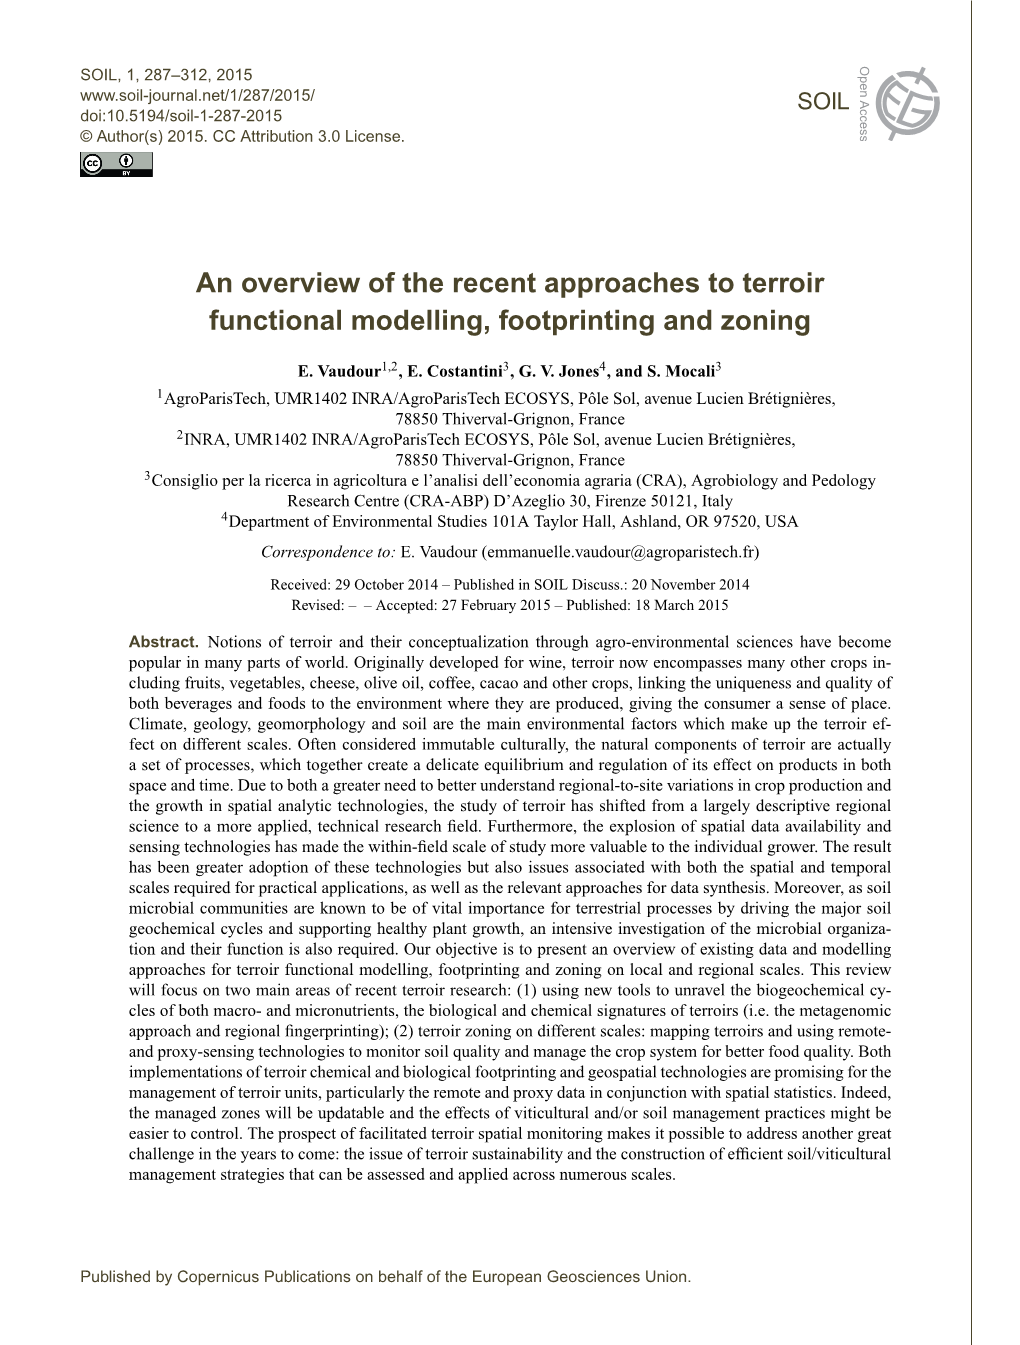 An Overview of the Recent Approaches to Terroir Functional Modelling, Footprinting and Zoning